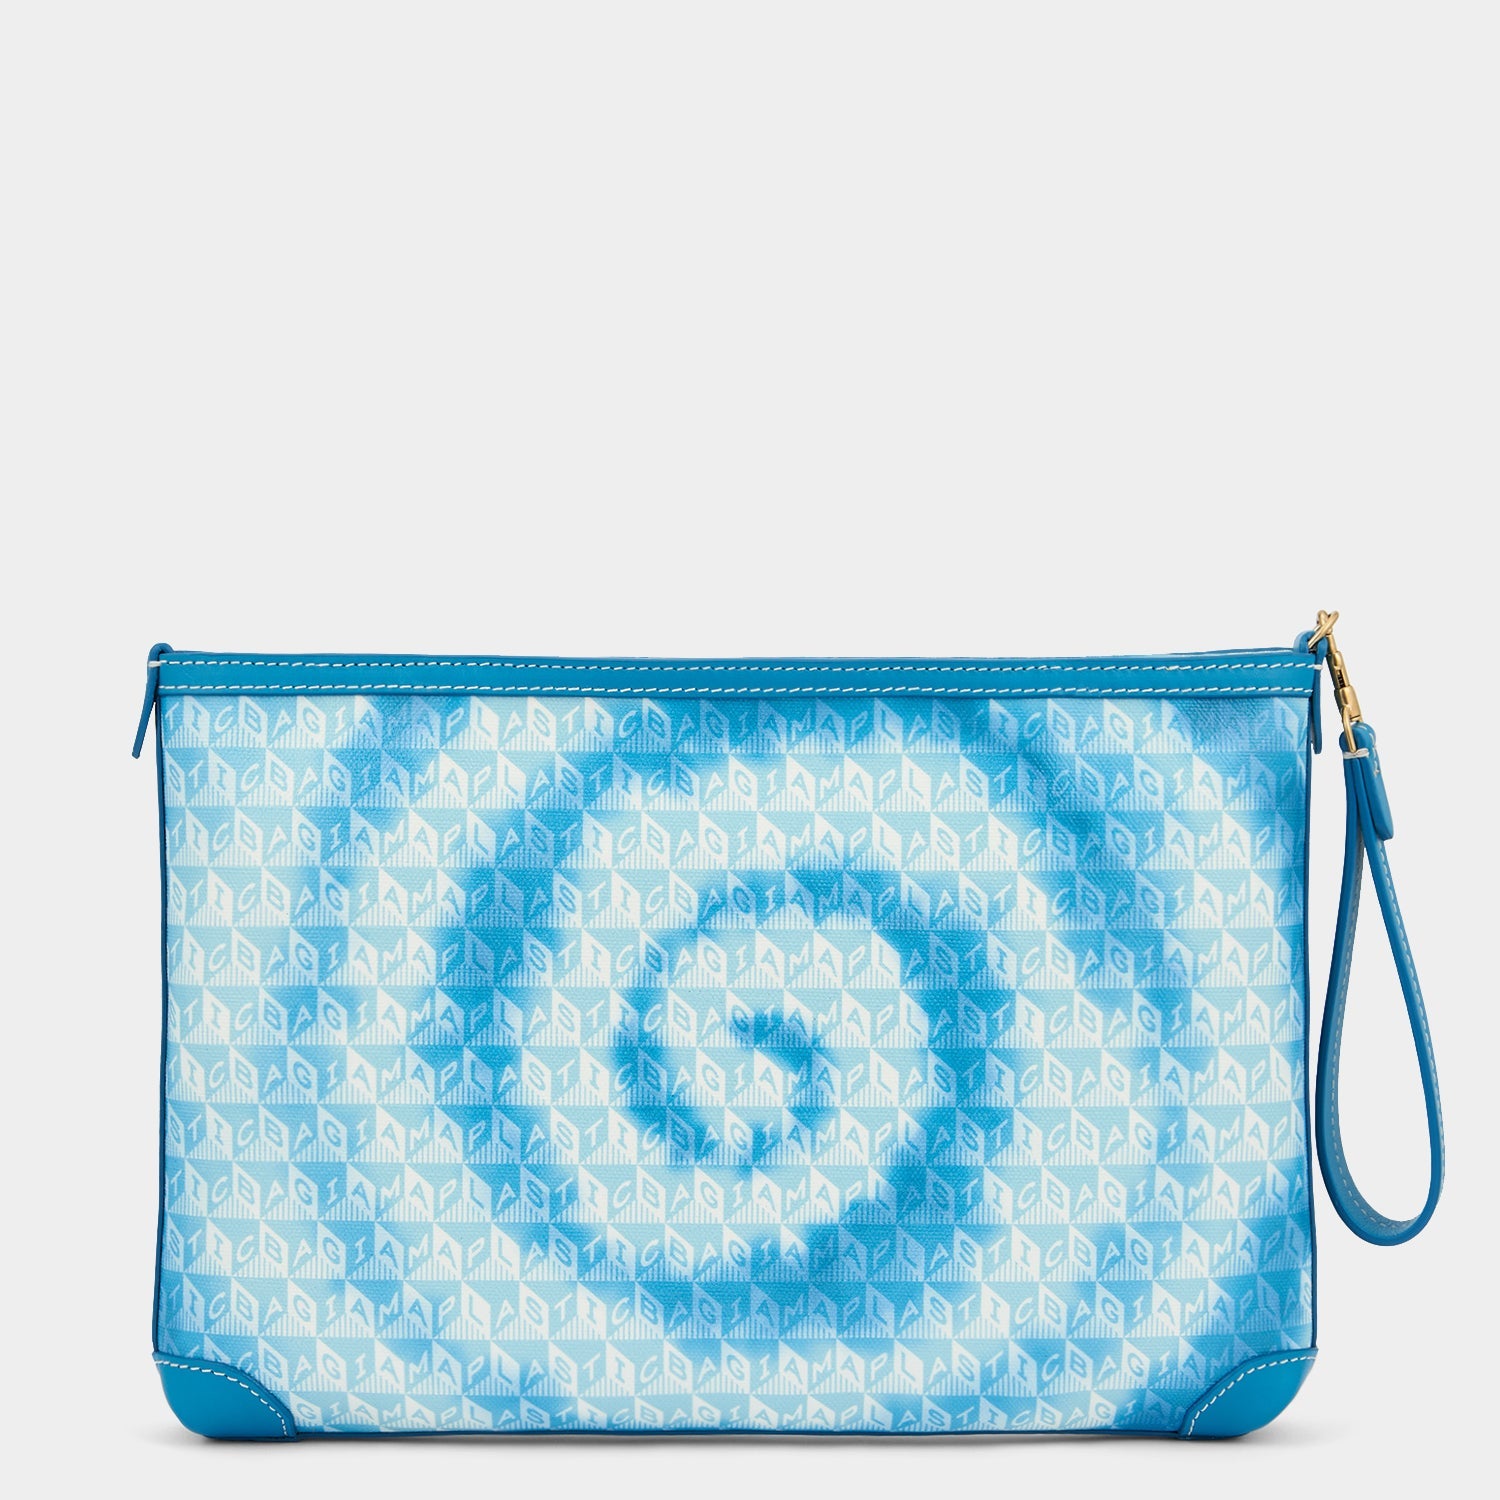 I am a Plastic Bag Tie Dye Pochette -

                  
                    Recycled Canvas in Peacock -
                  

                  Anya Hindmarch US
